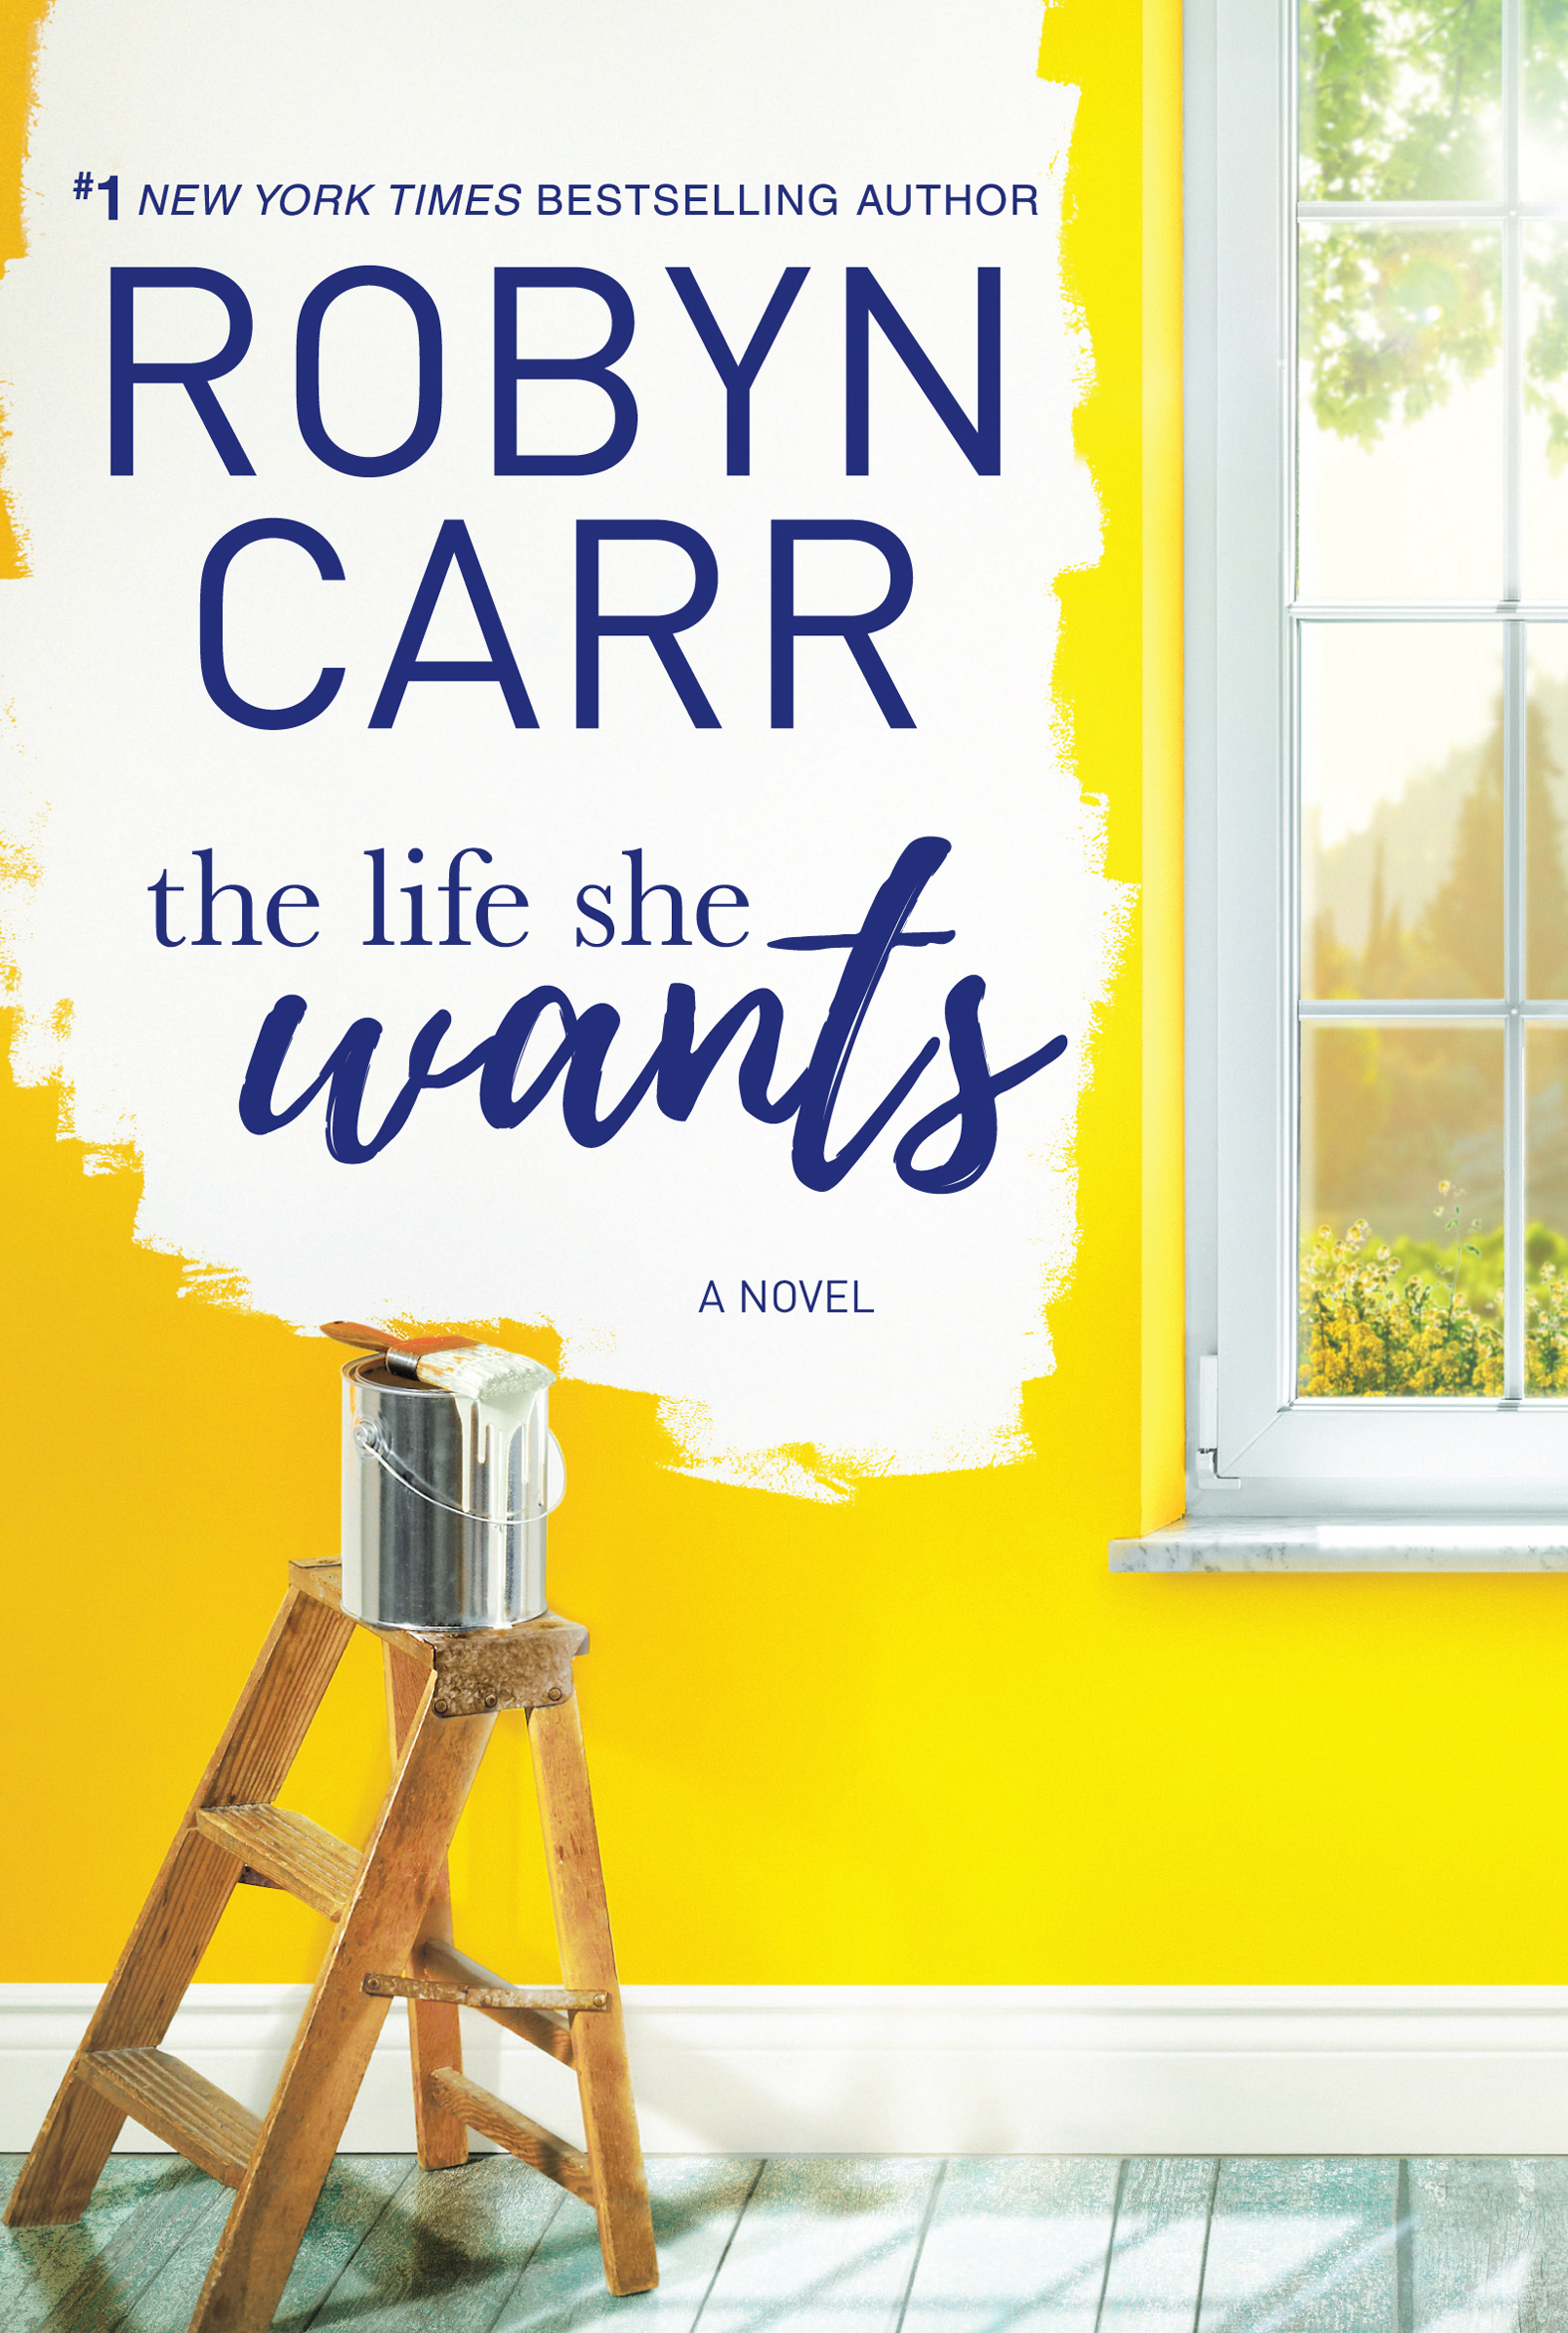 The Life She Wants (2016) by Robyn Carr